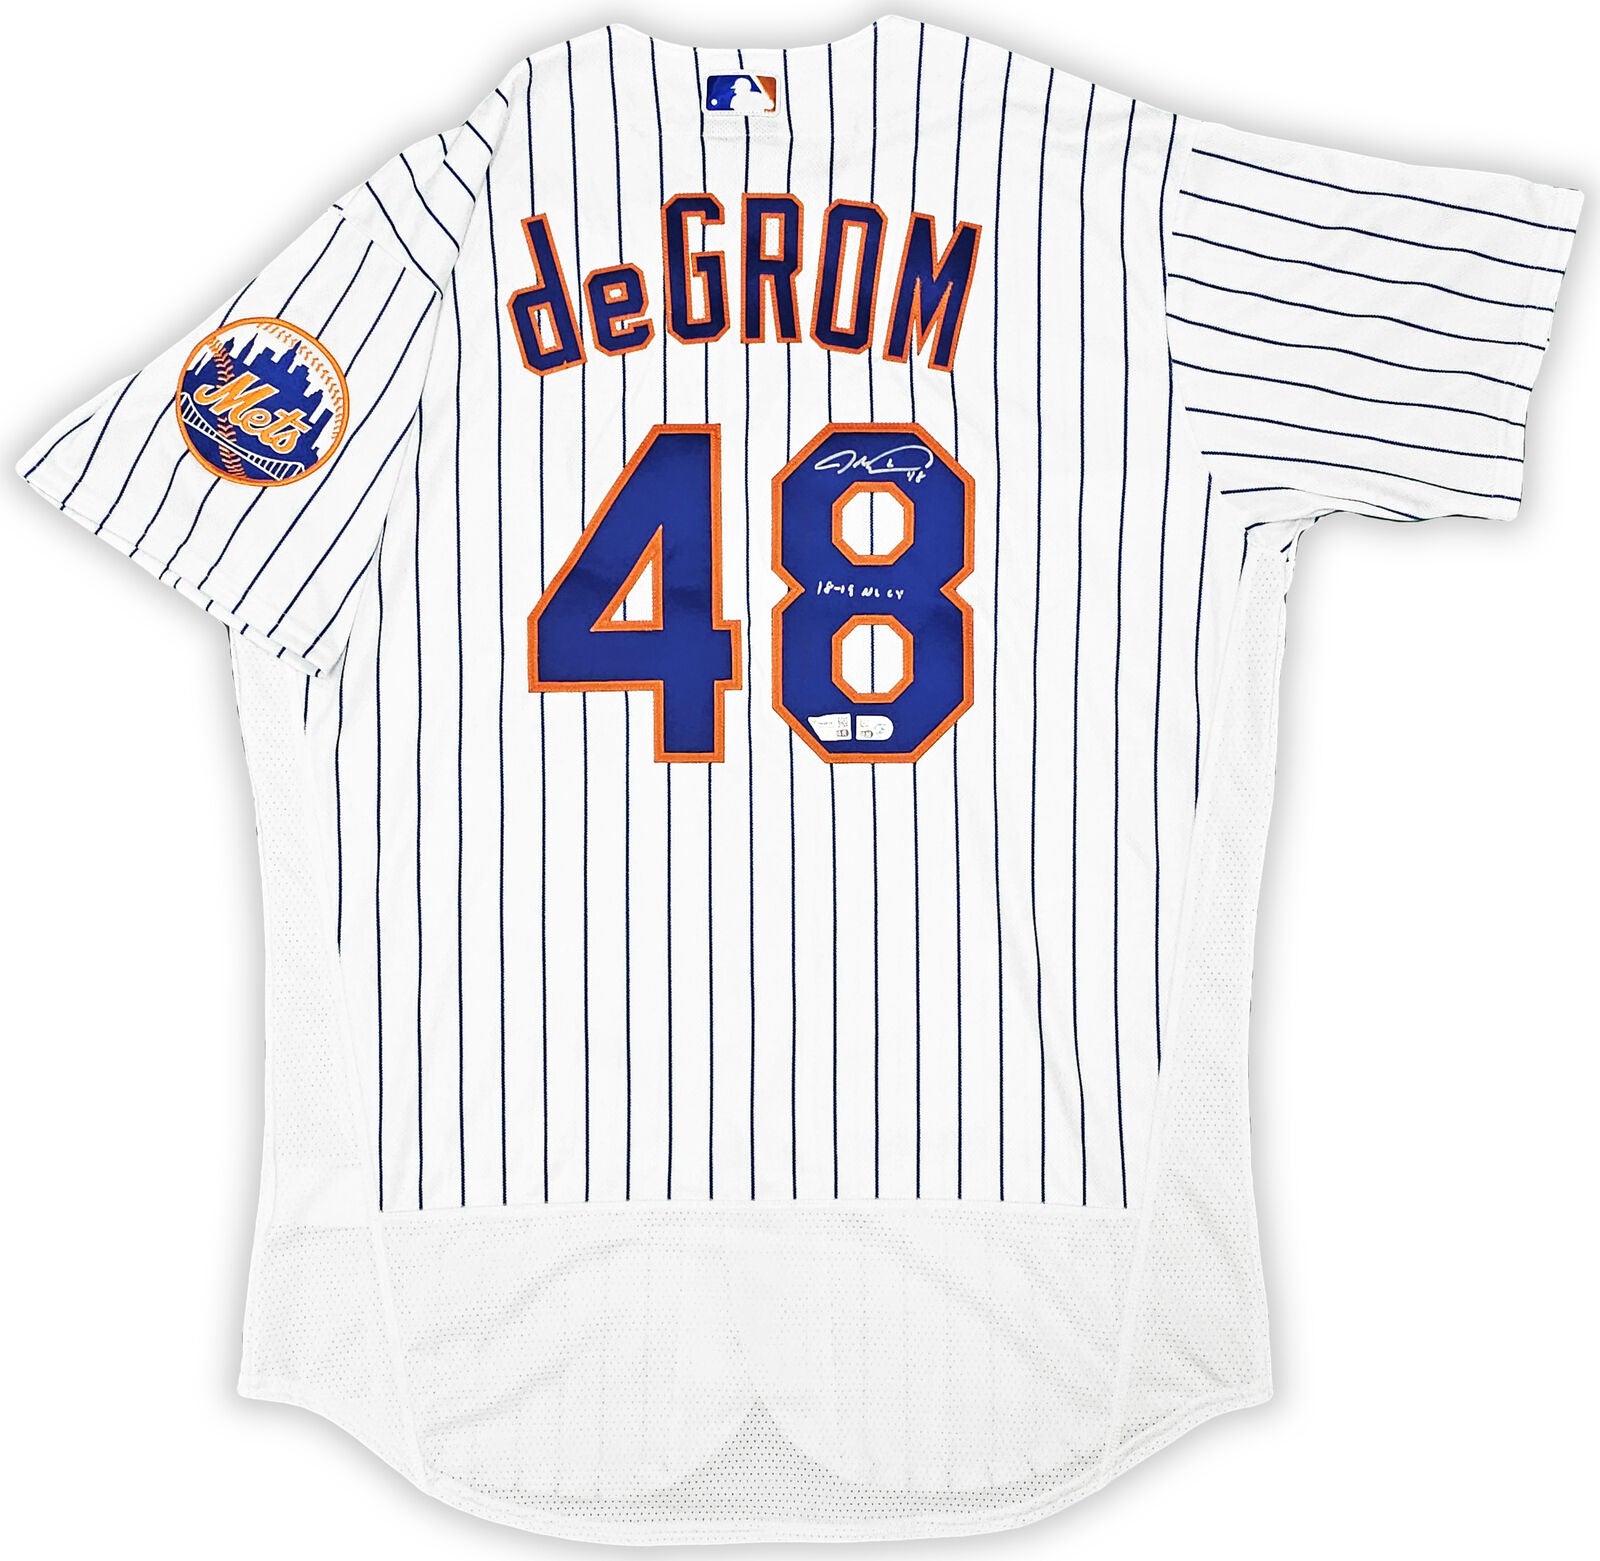 Jacob deGrom New York Mets Fanatics Authentic Autographed Blue Authentic  Jersey